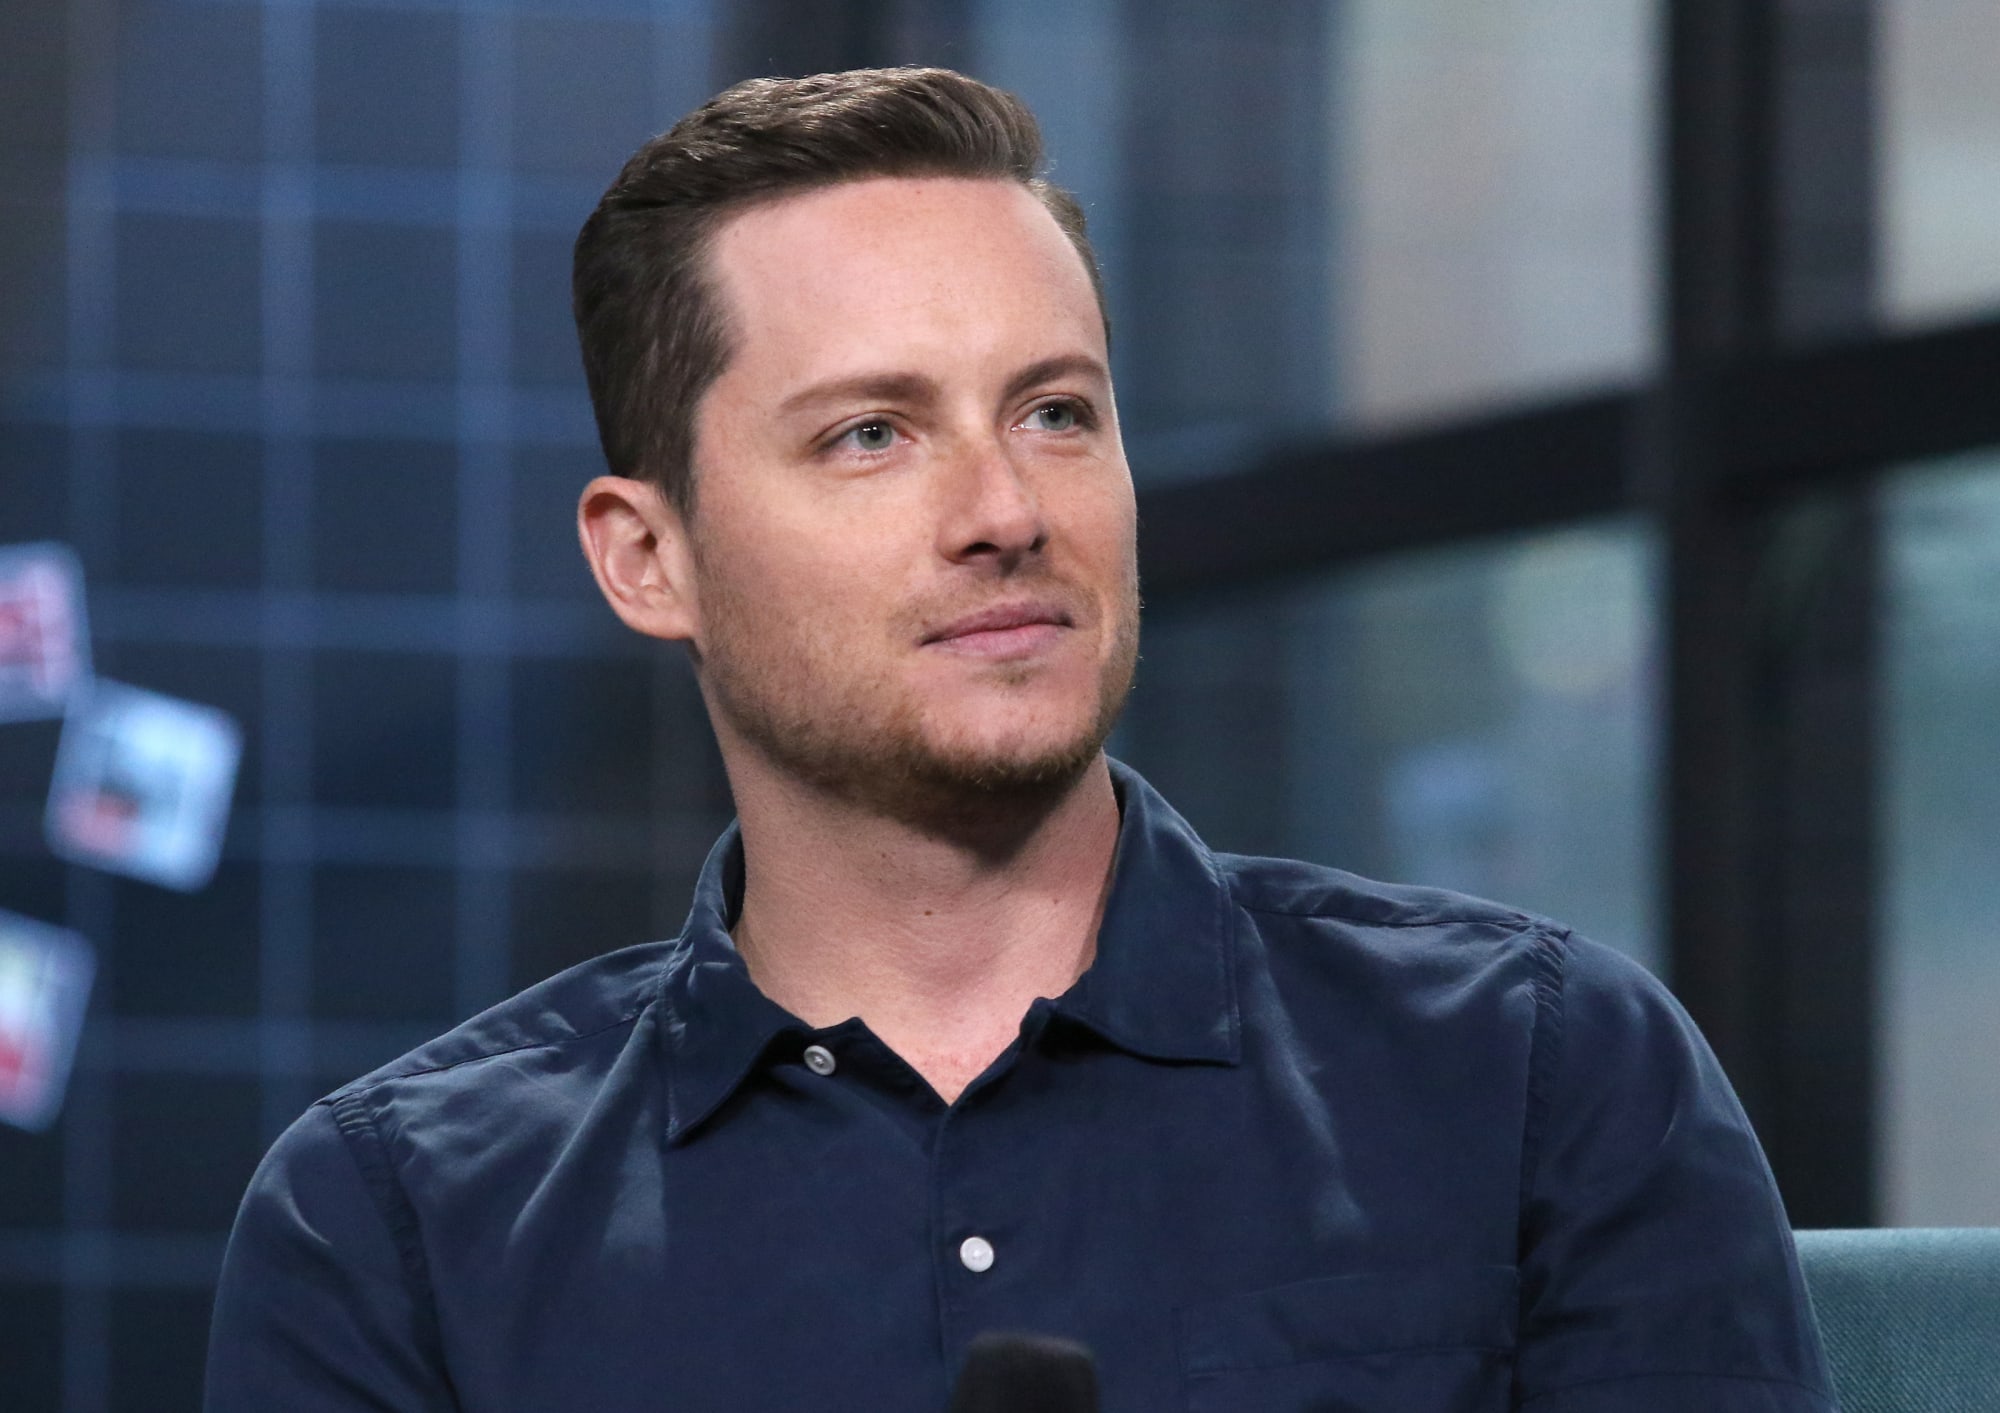 Chicago PD's Jesse Lee Soffer age, Instagram, height, girlfriend